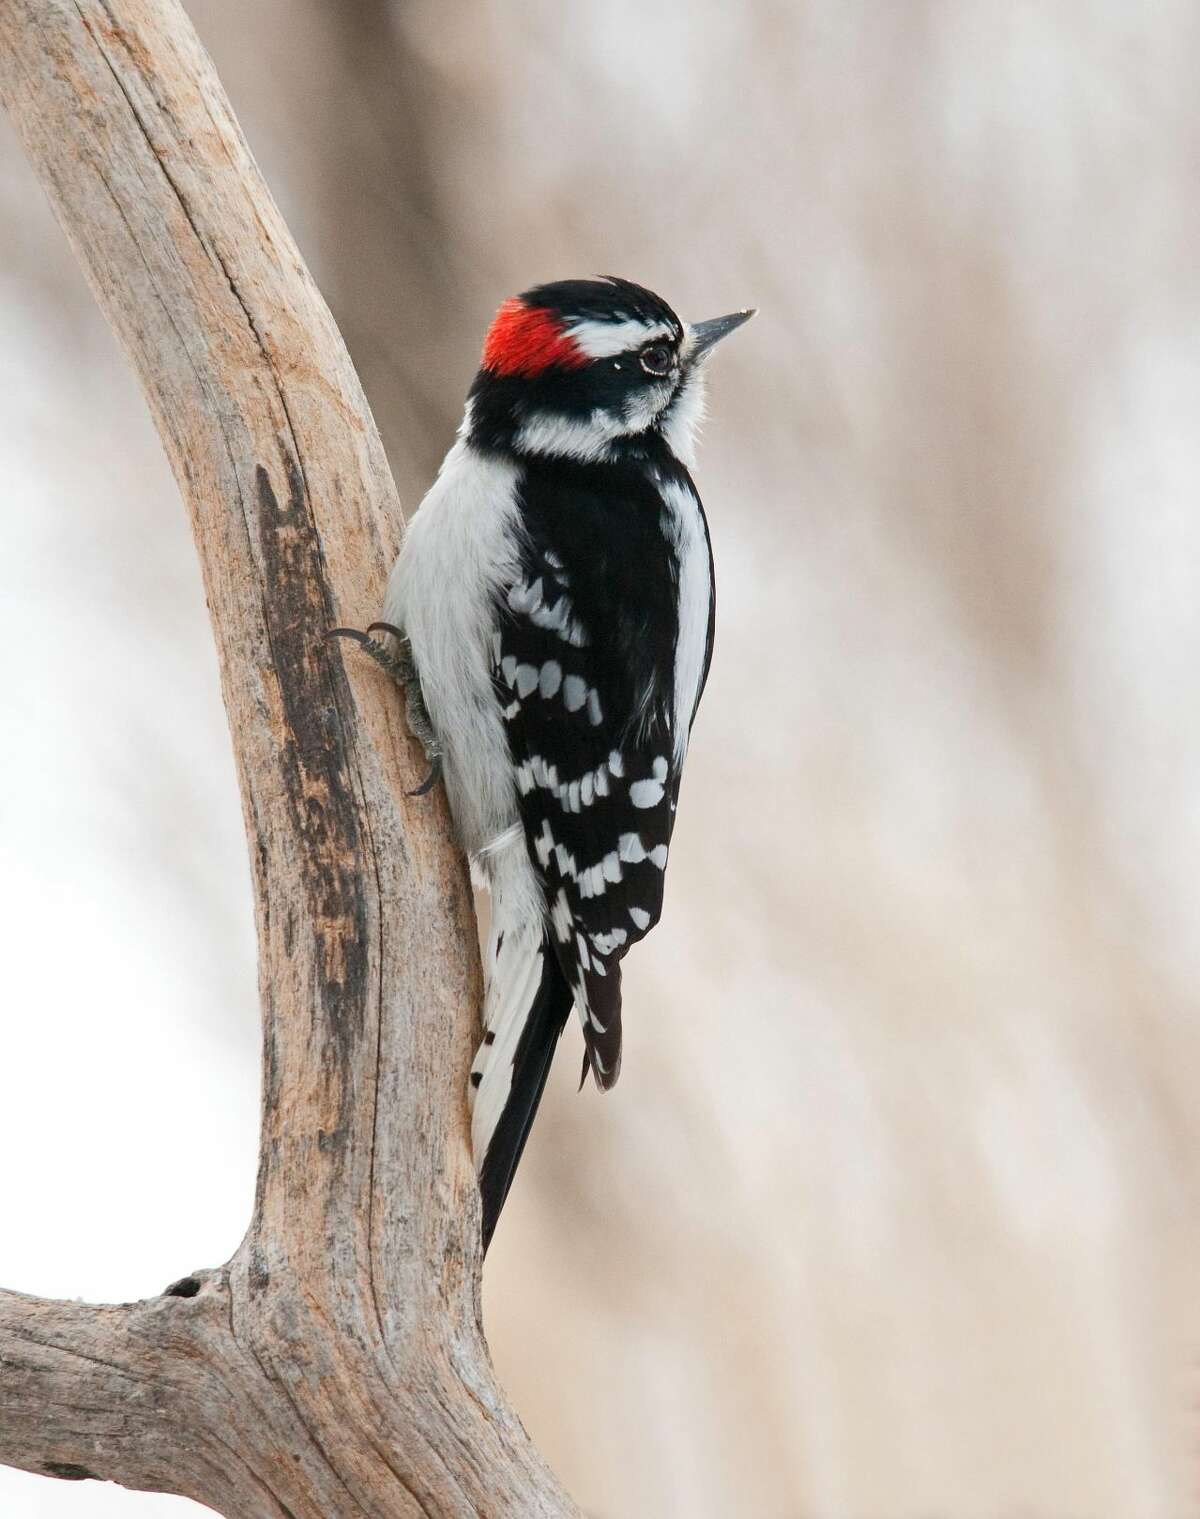 Jerry Acton of New York caught this image of a downy woodpecker during a previous bird count in Connecticut.